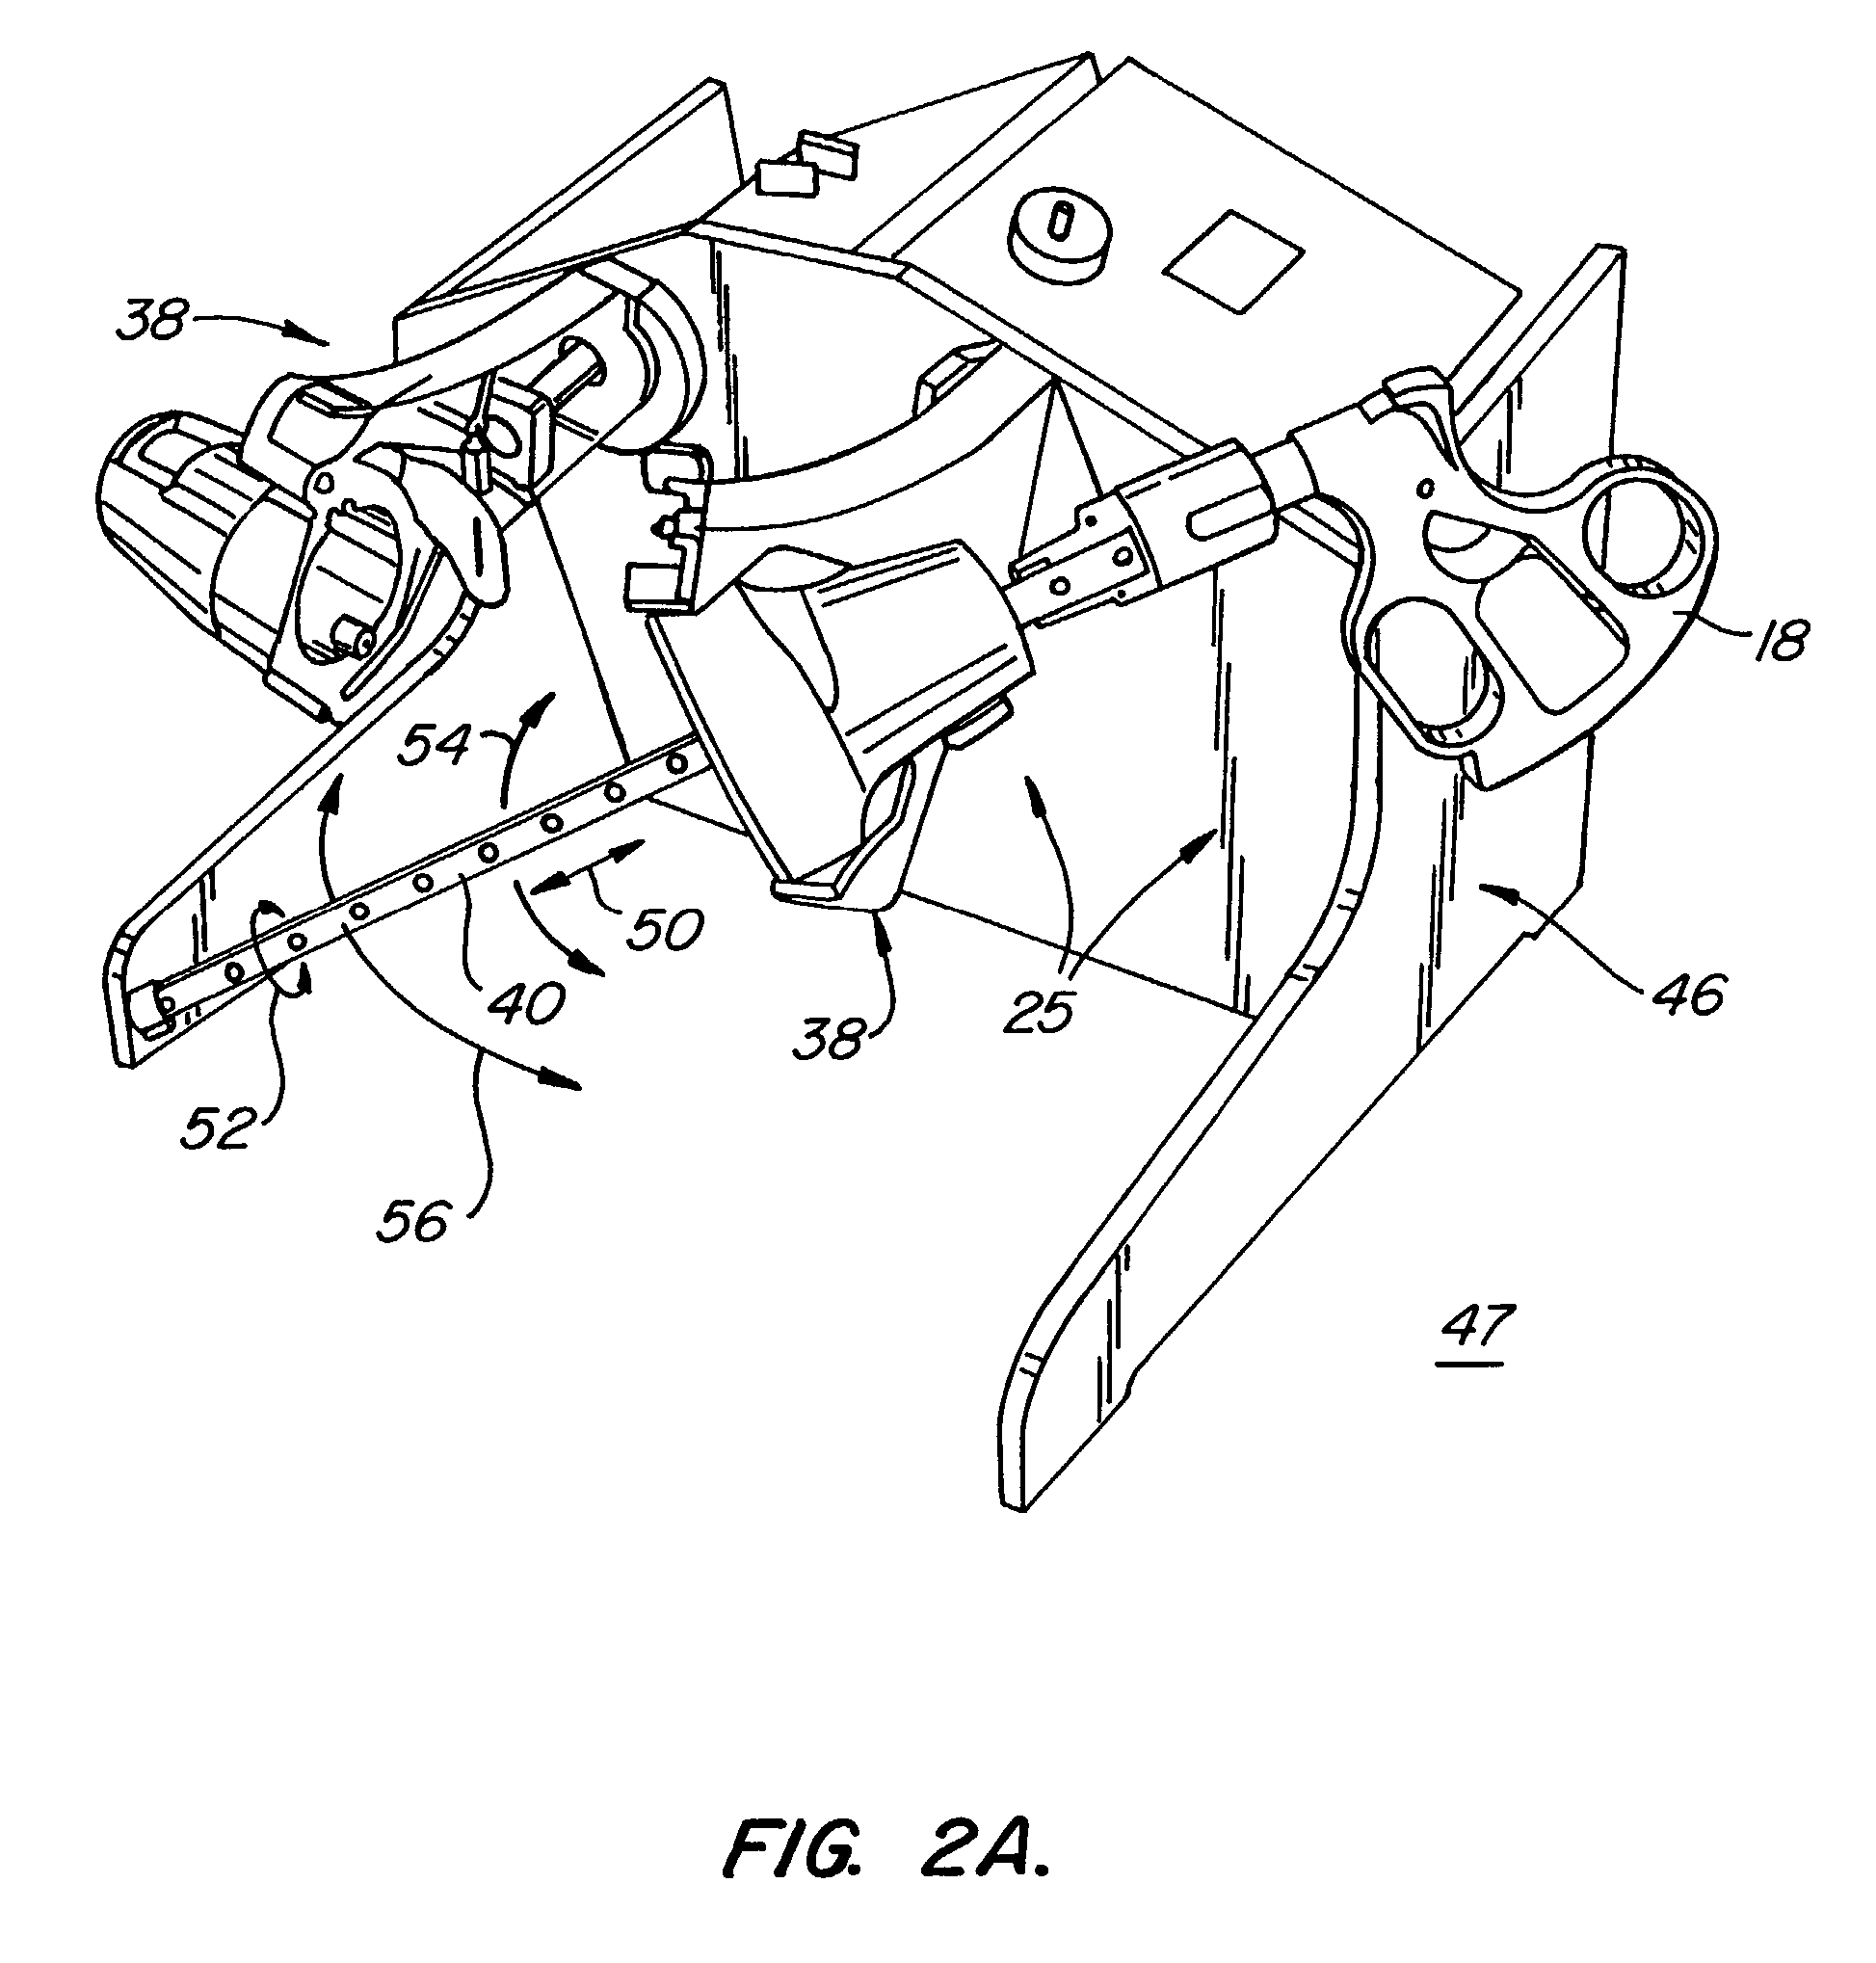 Interface apparatus with cable-driven force feedback and four grounded actuators